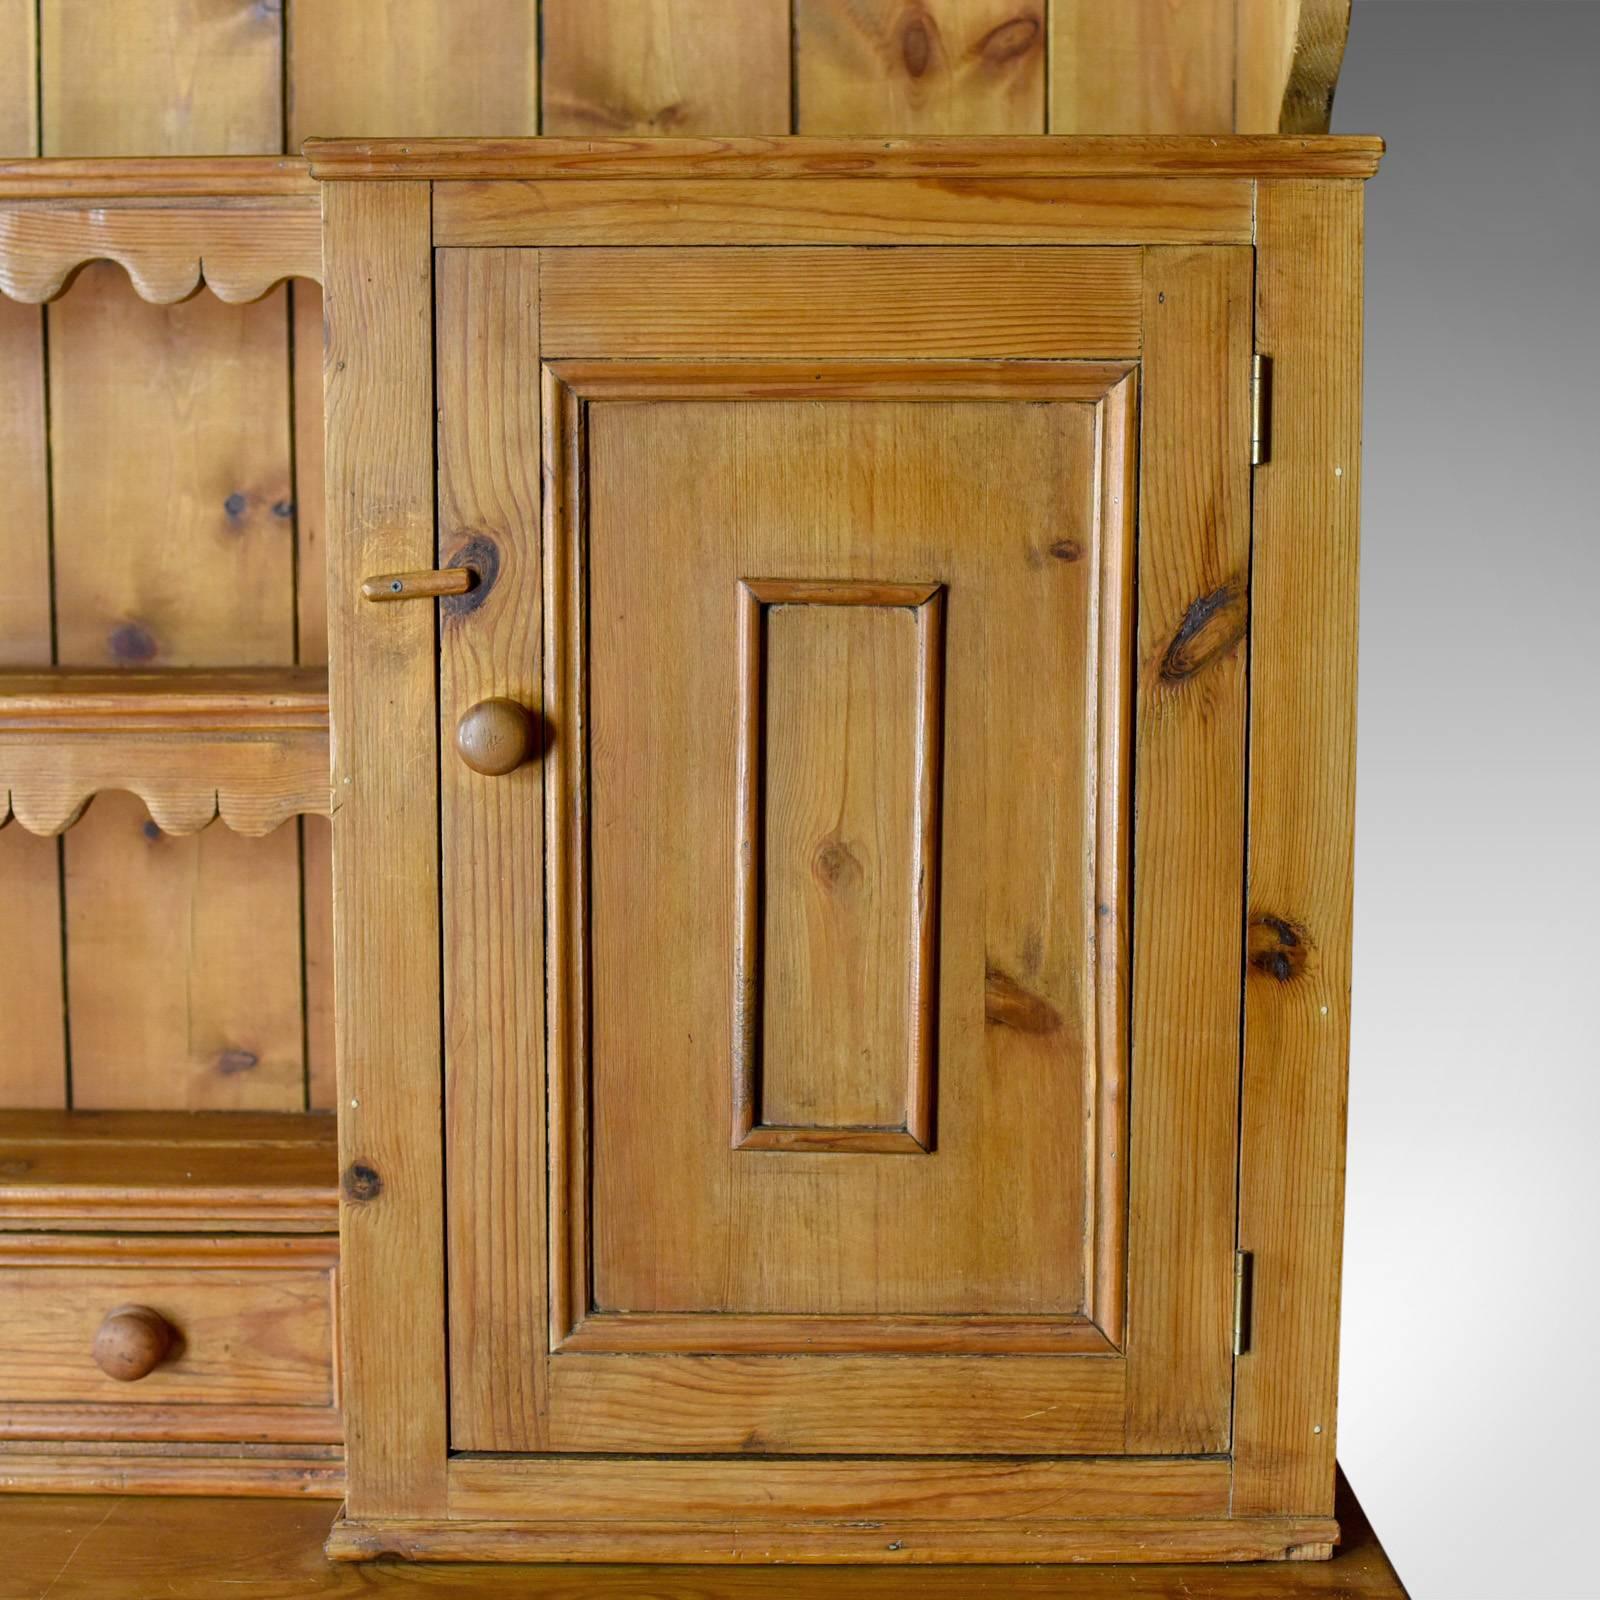 English Large Pine Dresser in Victorian Taste Country Kitchen Cabinet, Late 20th Century